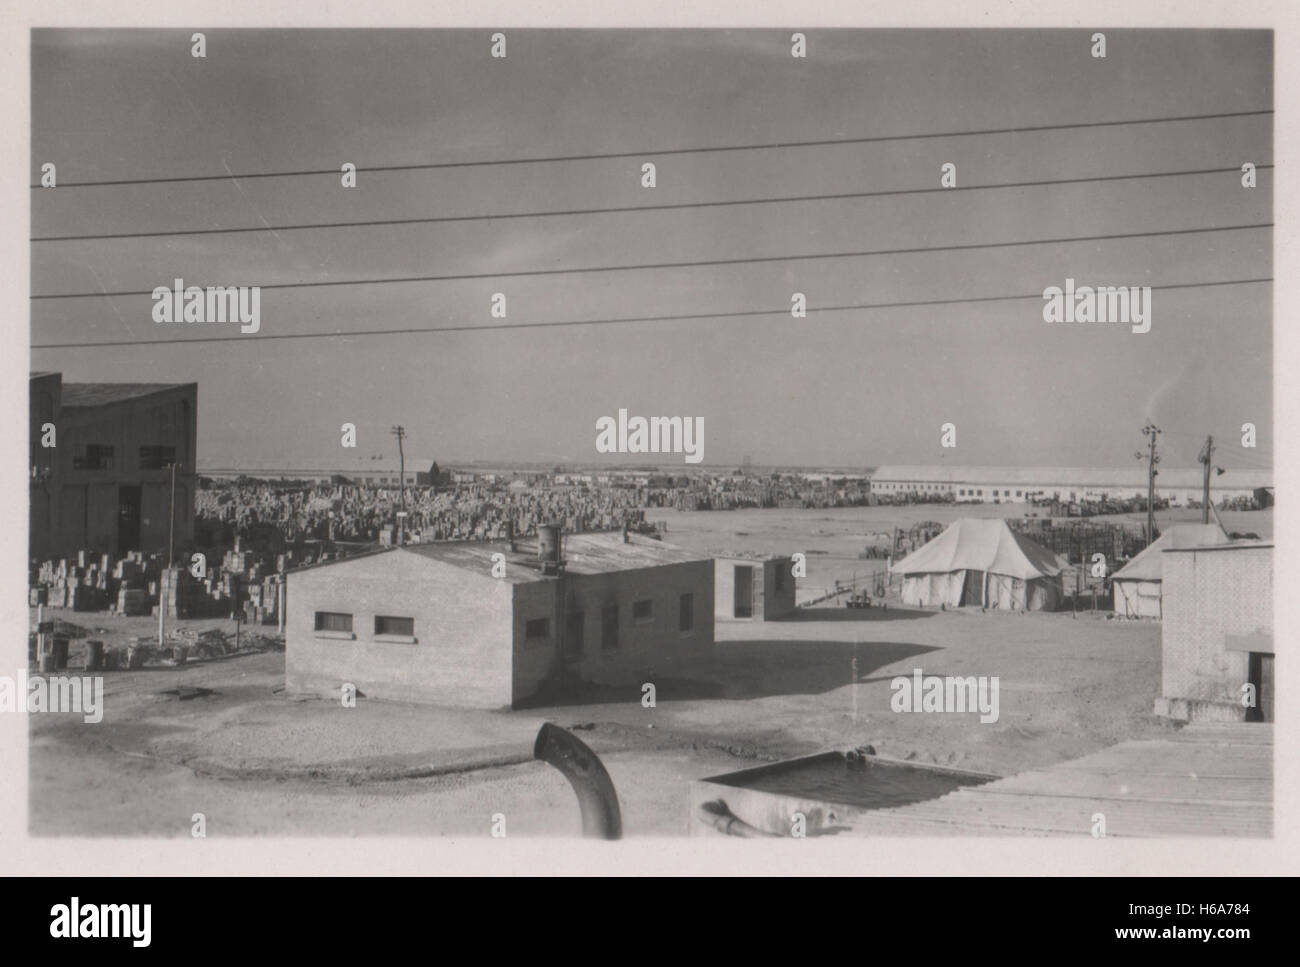 British army storage depot at 10 Base Ordnance Depot Royal Army Ordnance Corps (RAOC) camp at Geneifa Ismailia area near the Suez Canal 1952 in the period prior to withdrawal of British troops from the Suez Canal zone and the Suez Crisis. Stock Photo